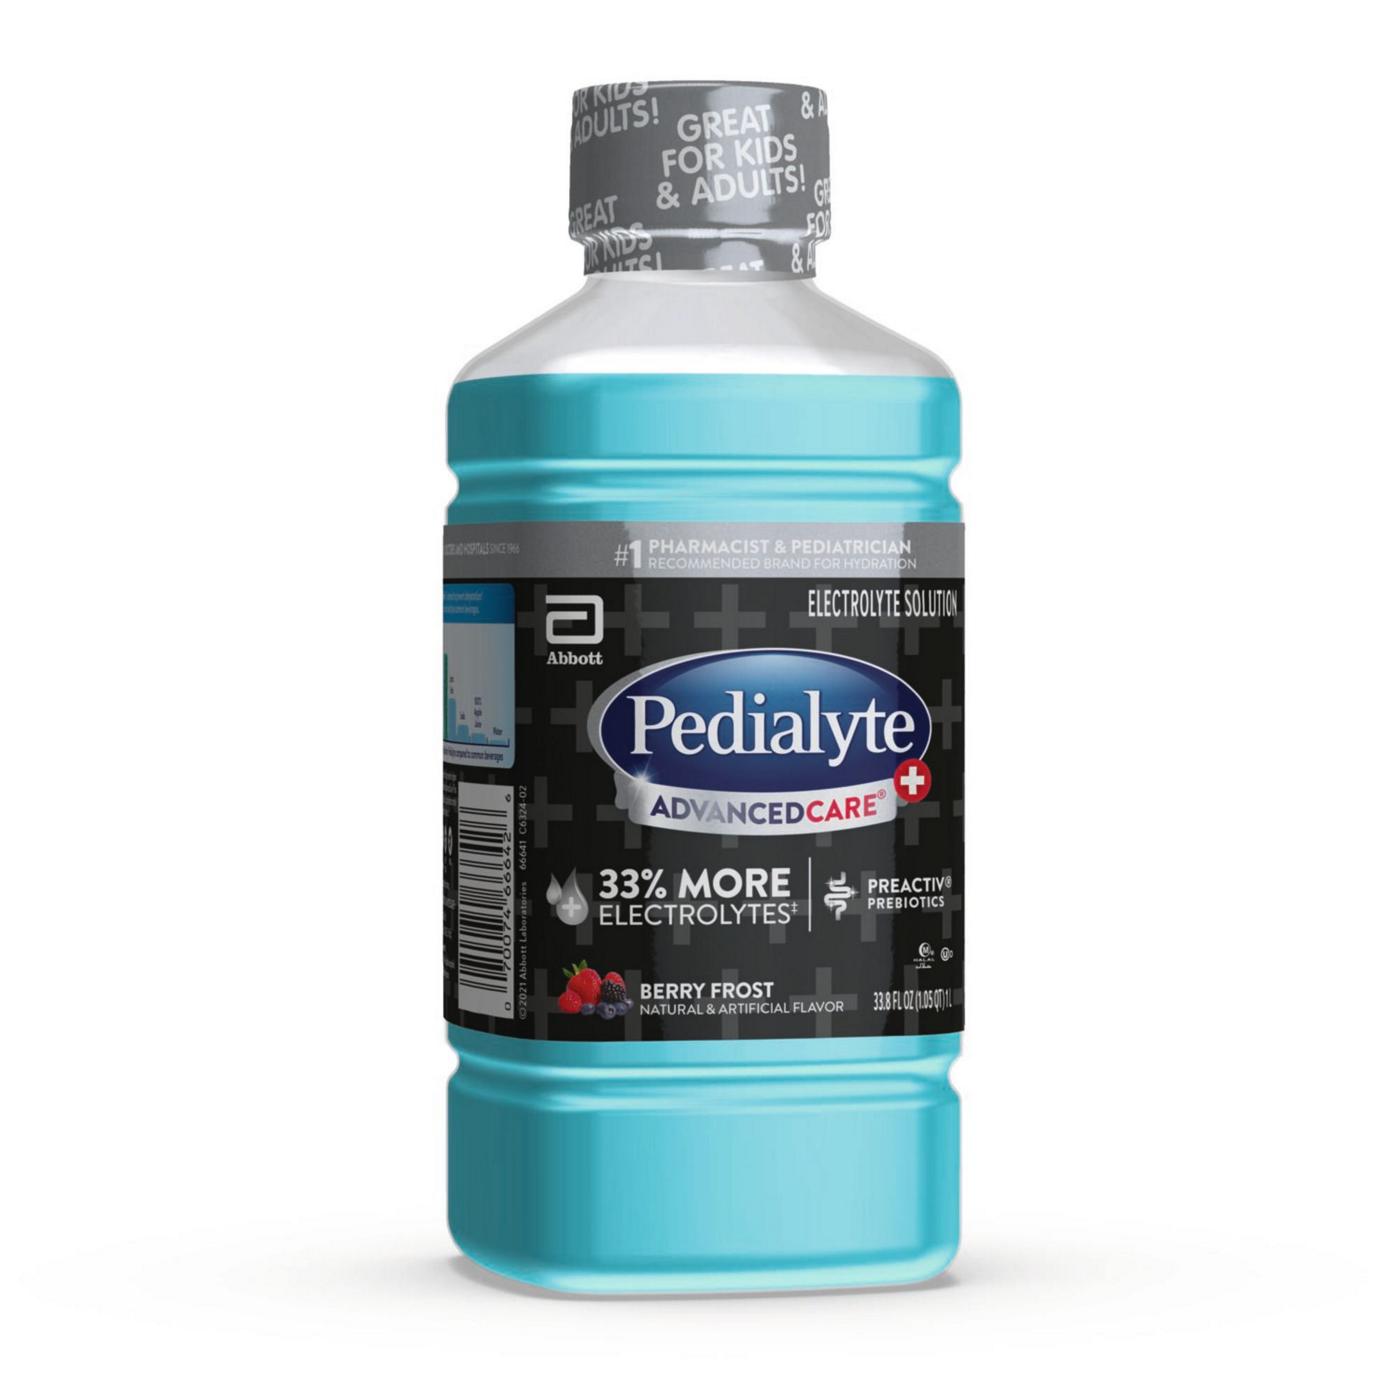 Pedialyte AdvancedCare Plus Electrolyte Solution - Berry Frost; image 5 of 6